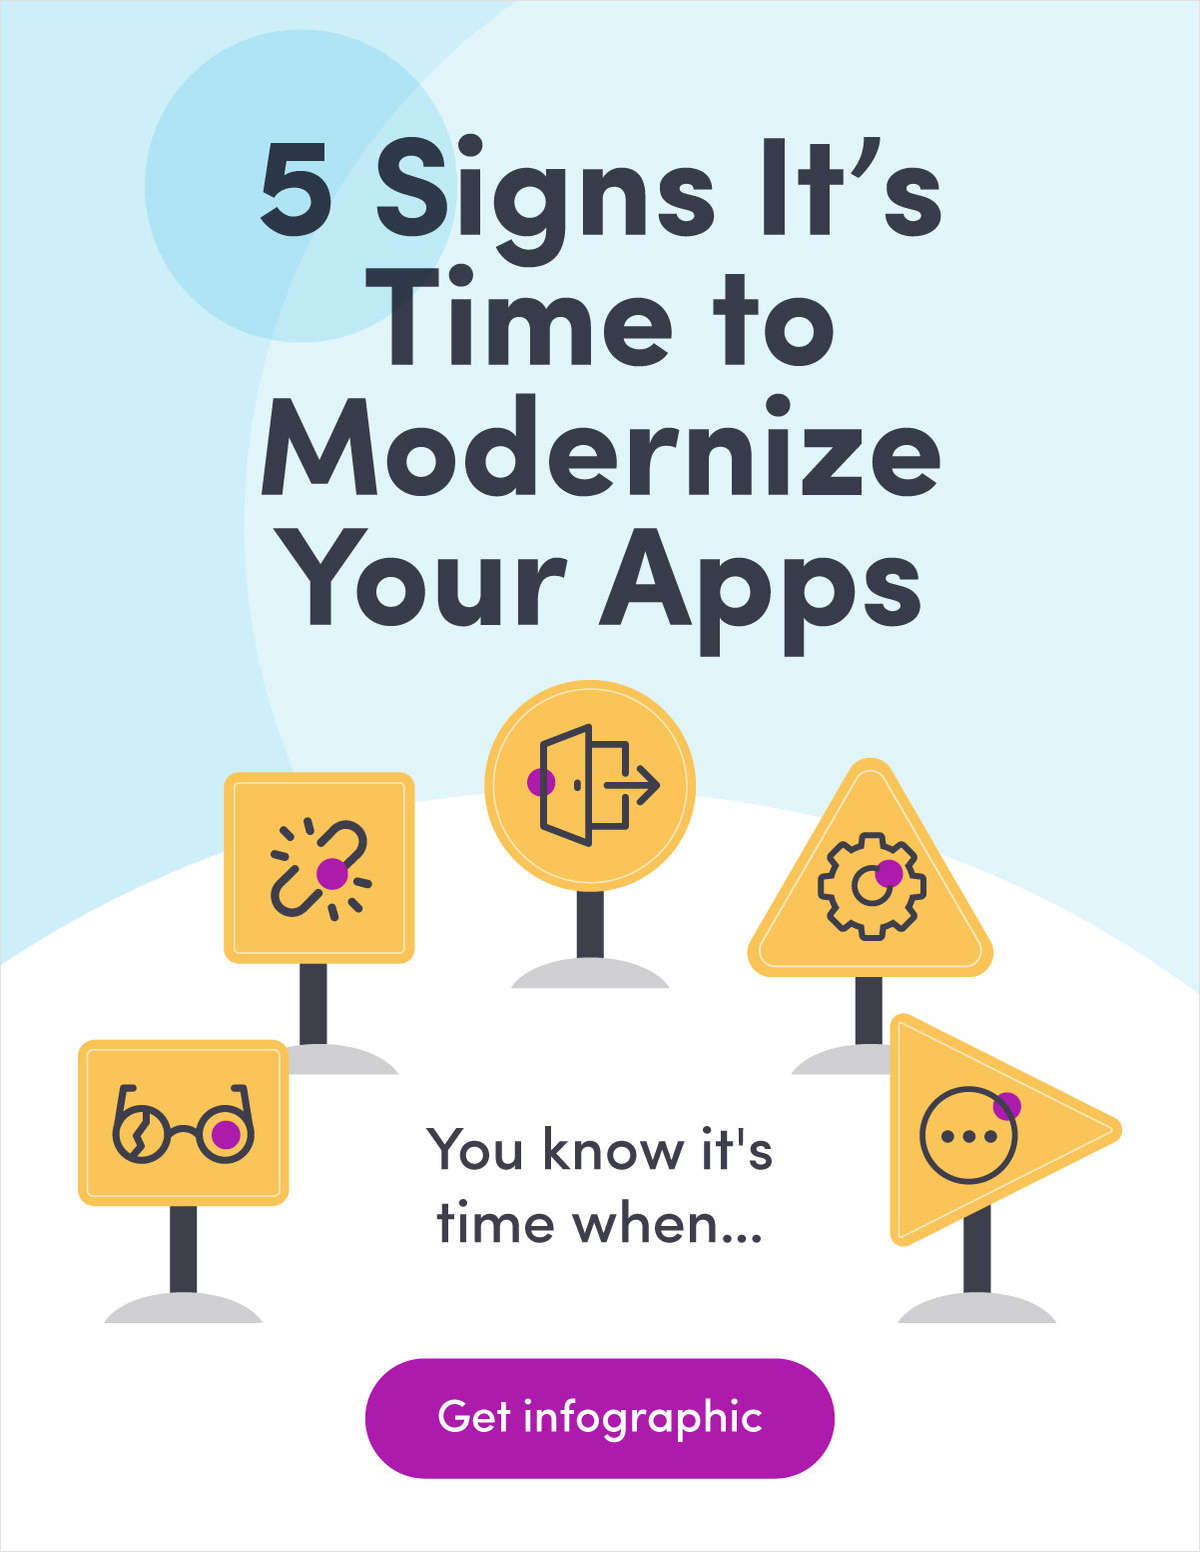 [Infographic] 5 Signs It's Time to Modernize Your Applications